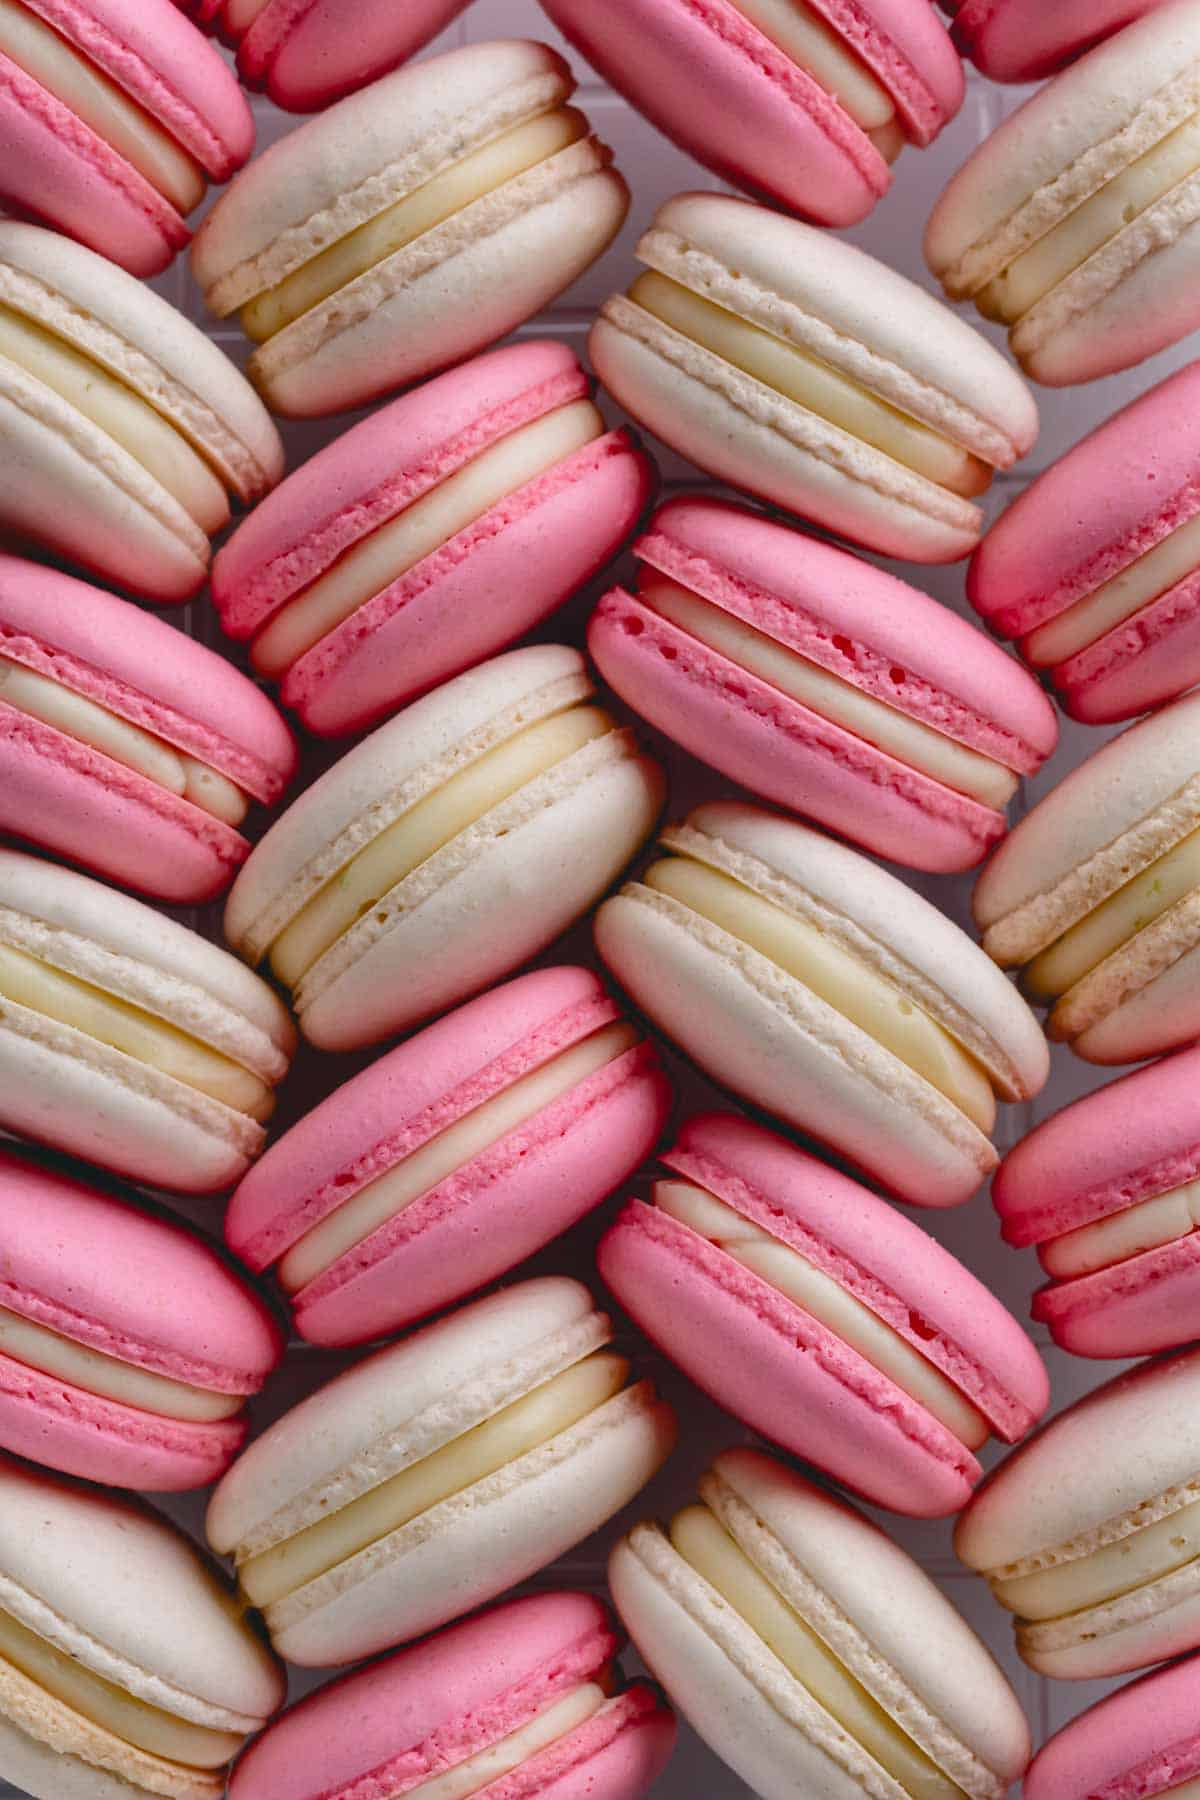 Pink and white french macarons.